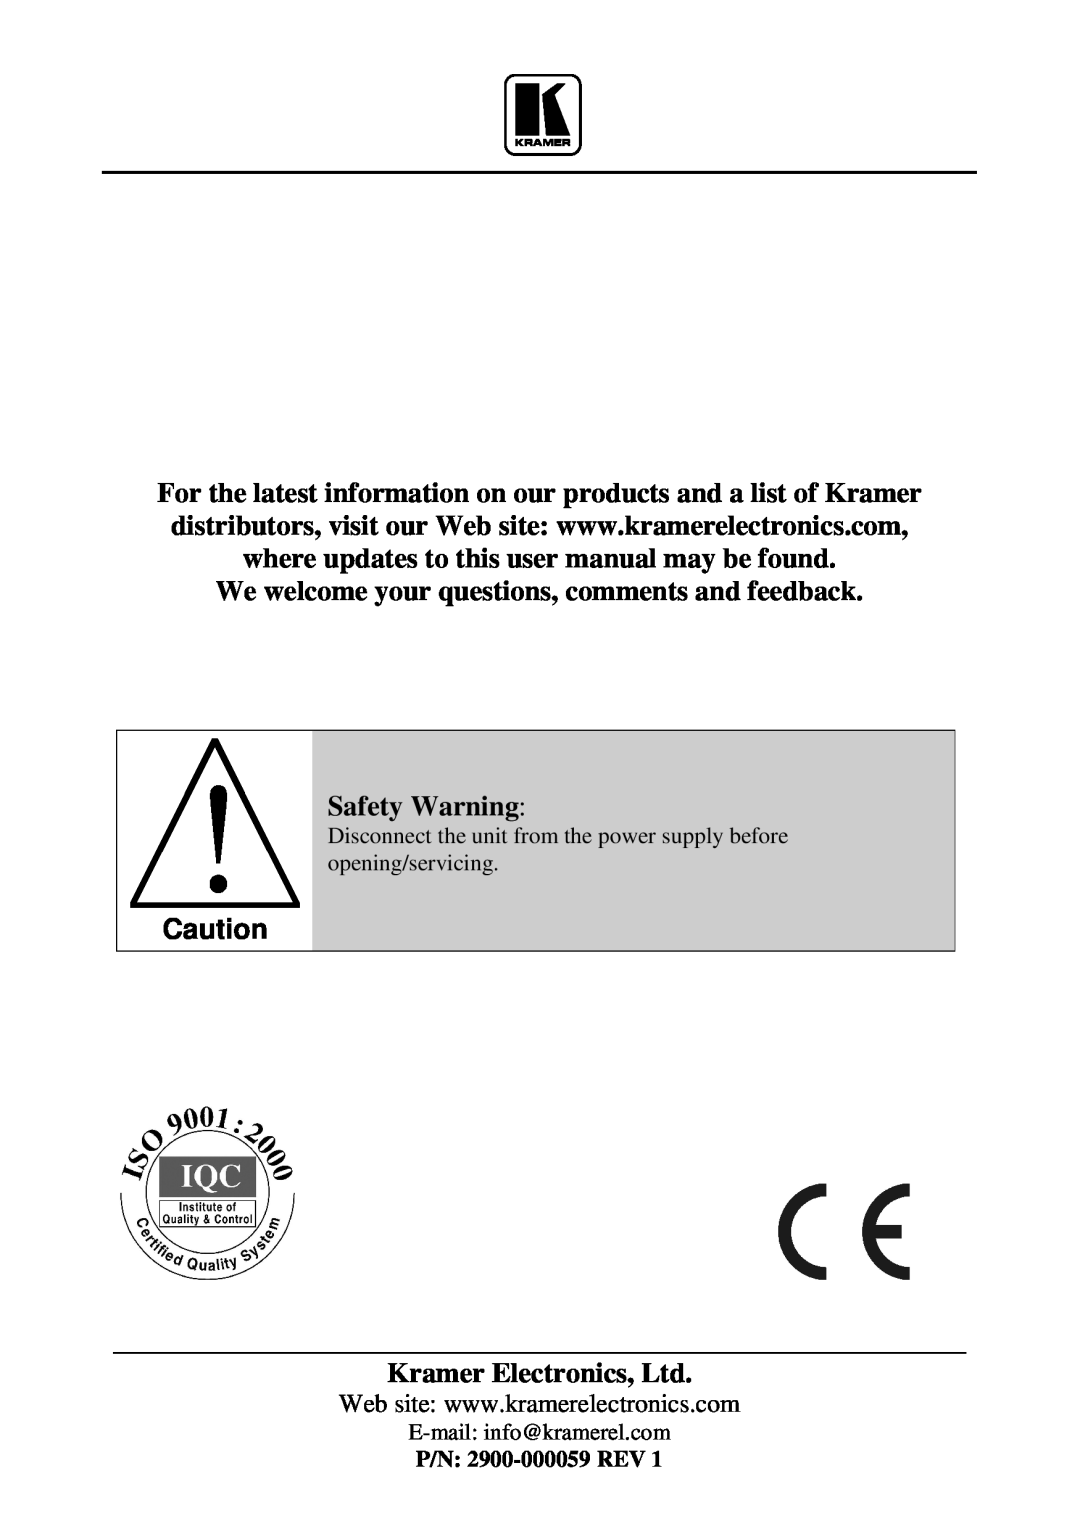 Kramer Electronics VP-419 user manual We welcome your questions, comments and feedback Safety Warning, P/N 2900-000059 REV 